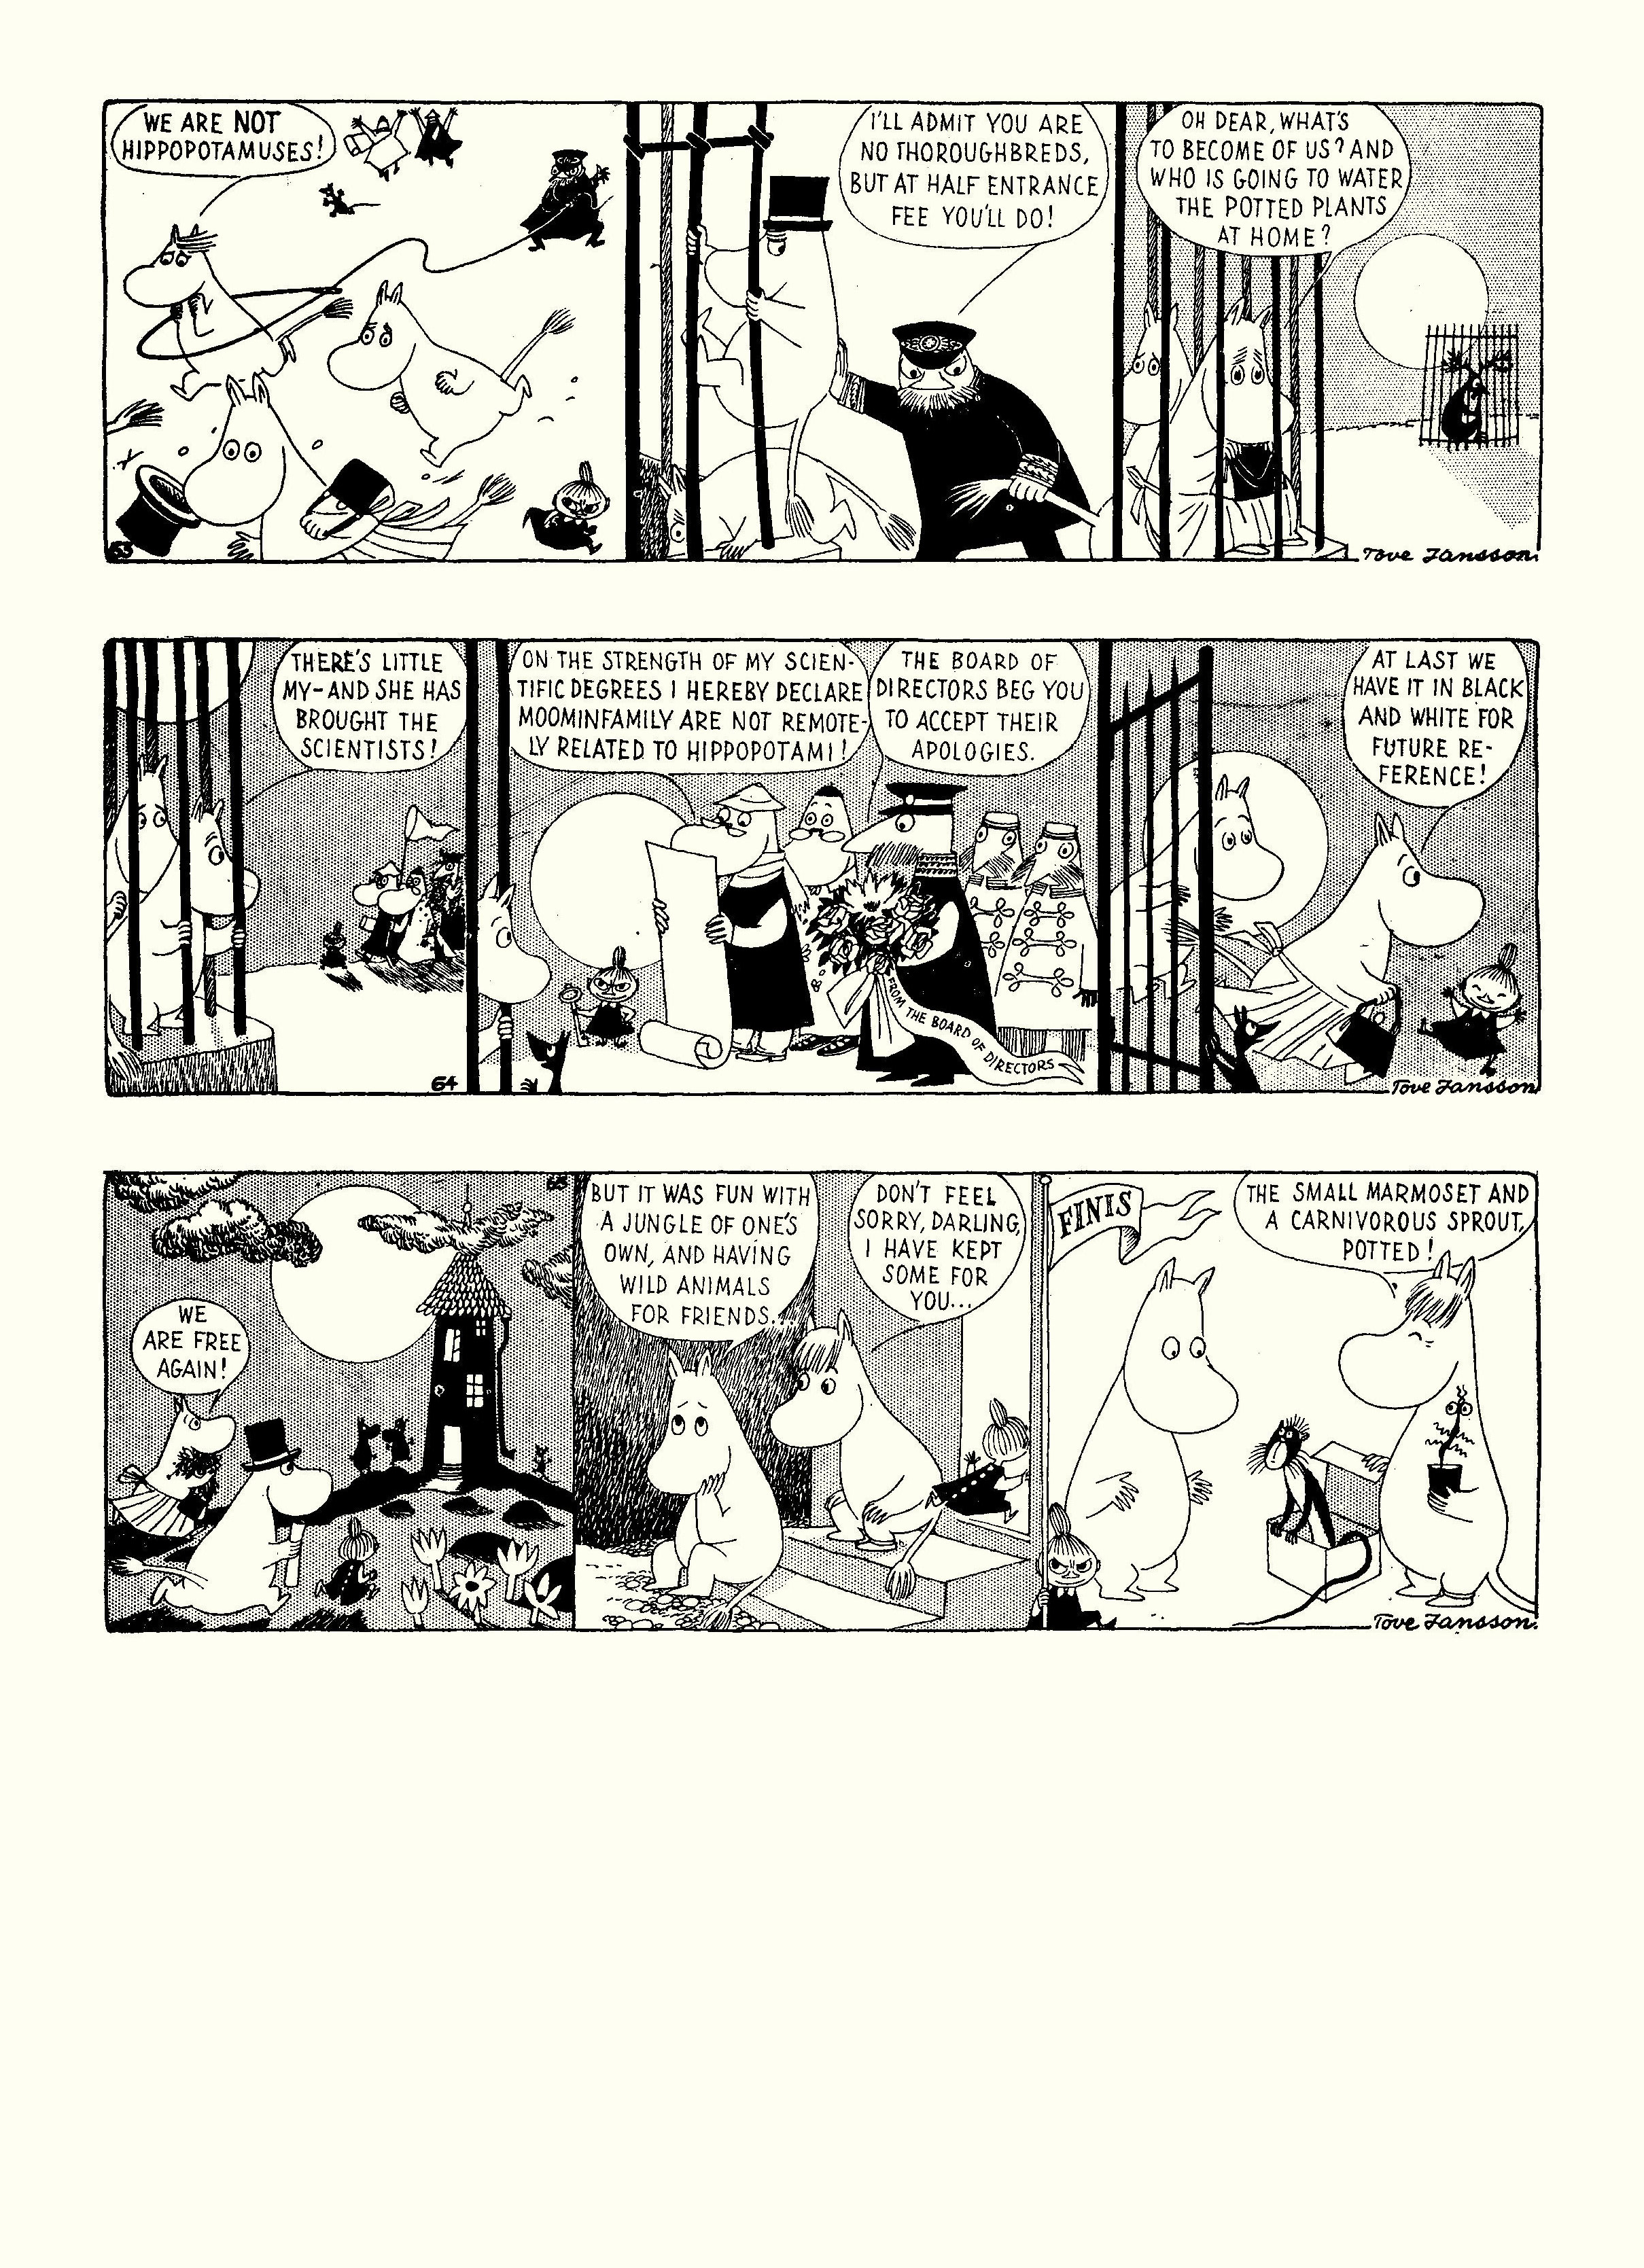 Read online Moomin: The Complete Tove Jansson Comic Strip comic -  Issue # TPB 3 - 36